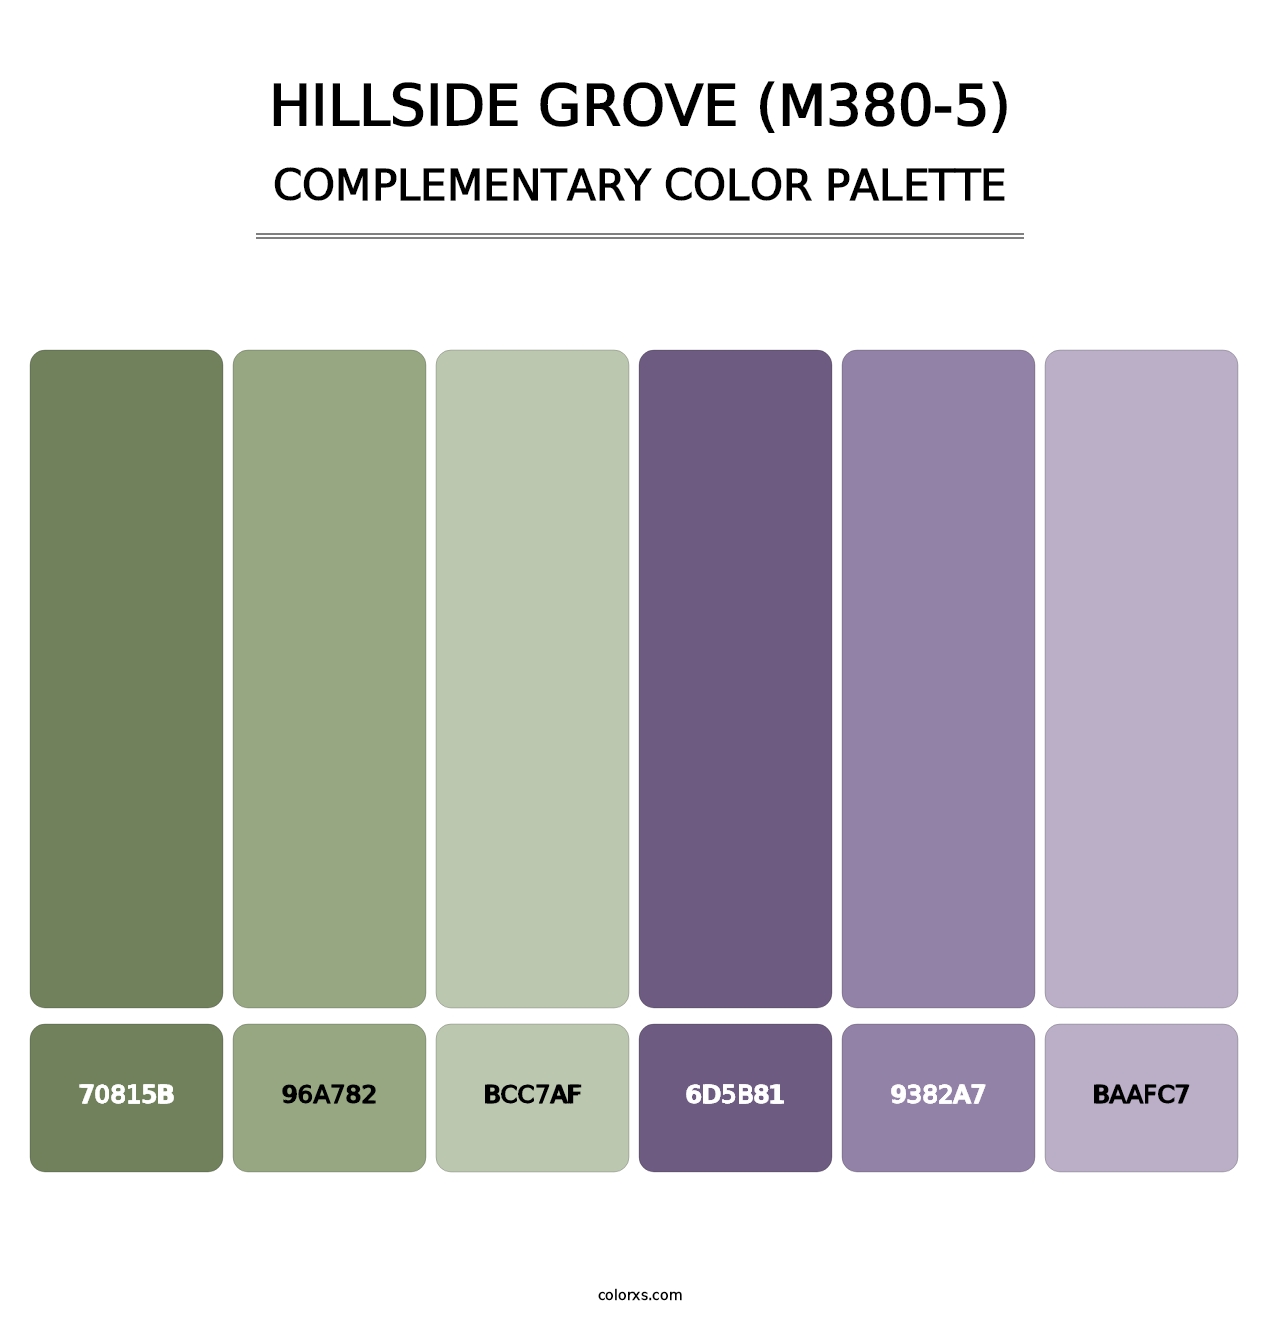 Hillside Grove (M380-5) - Complementary Color Palette